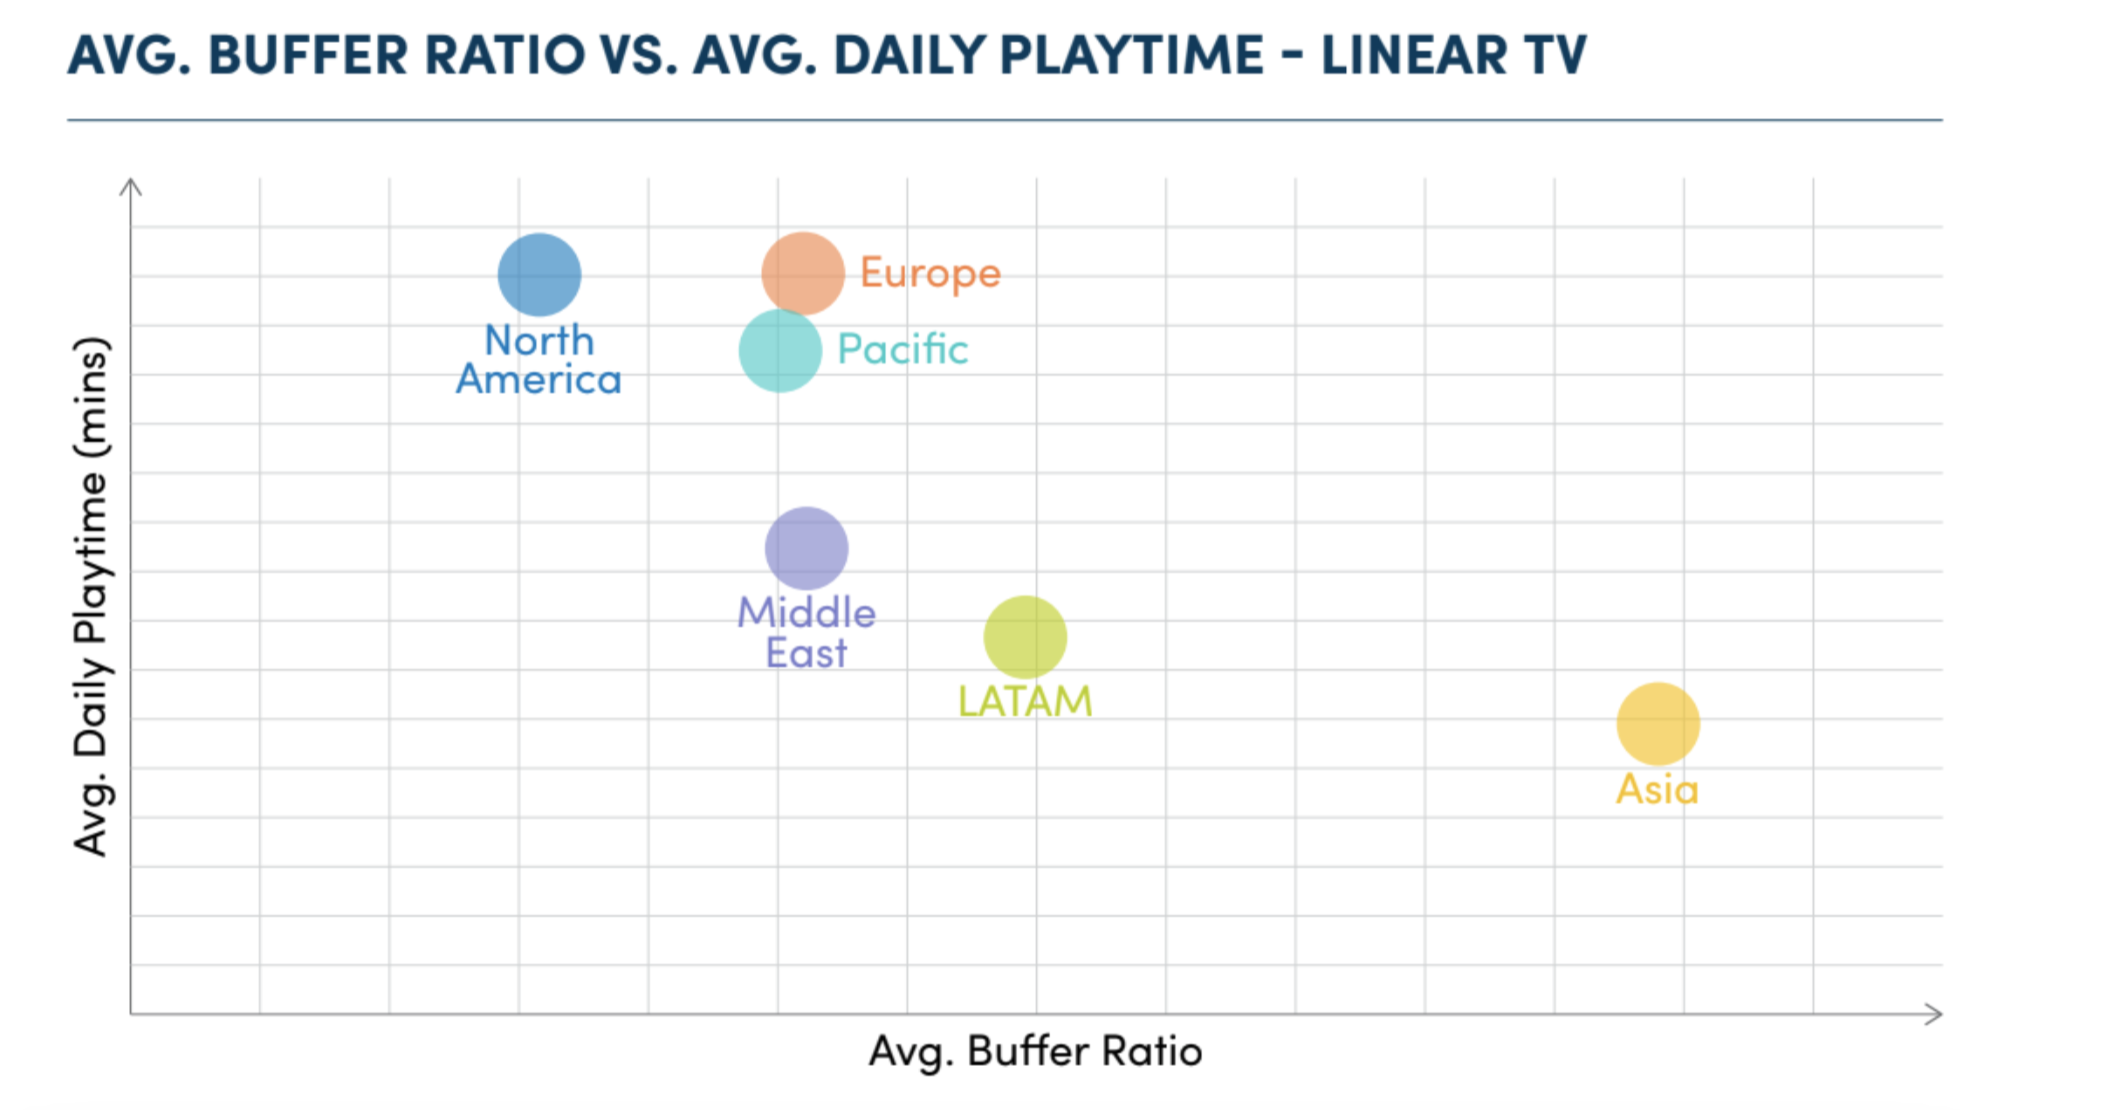 How video streaming quality affects user engagement for Linear TV